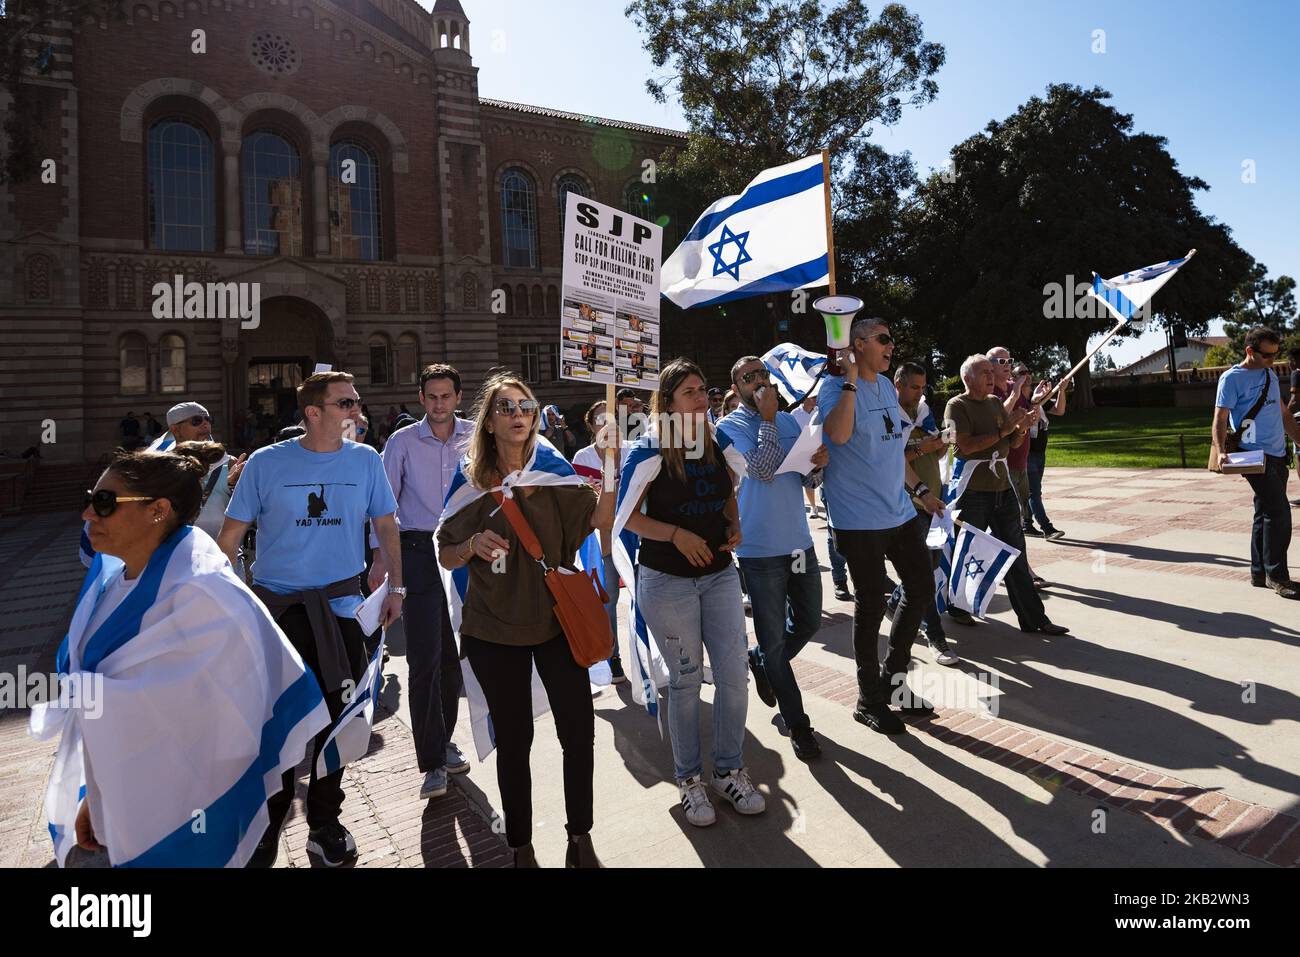 Members of the Jewish community and their allies protest anti-Semitism and the upcoming National Students for Justice in Palestine conference at the UCLA campus in Los Angeles, California on November 6, 2018. The Los Angeles City Council called on UCLA to cancel the NSJP conference over fears that it will promote anti-Semitism. (Photo by Ronen Tivony/NurPhoto) Stock Photo